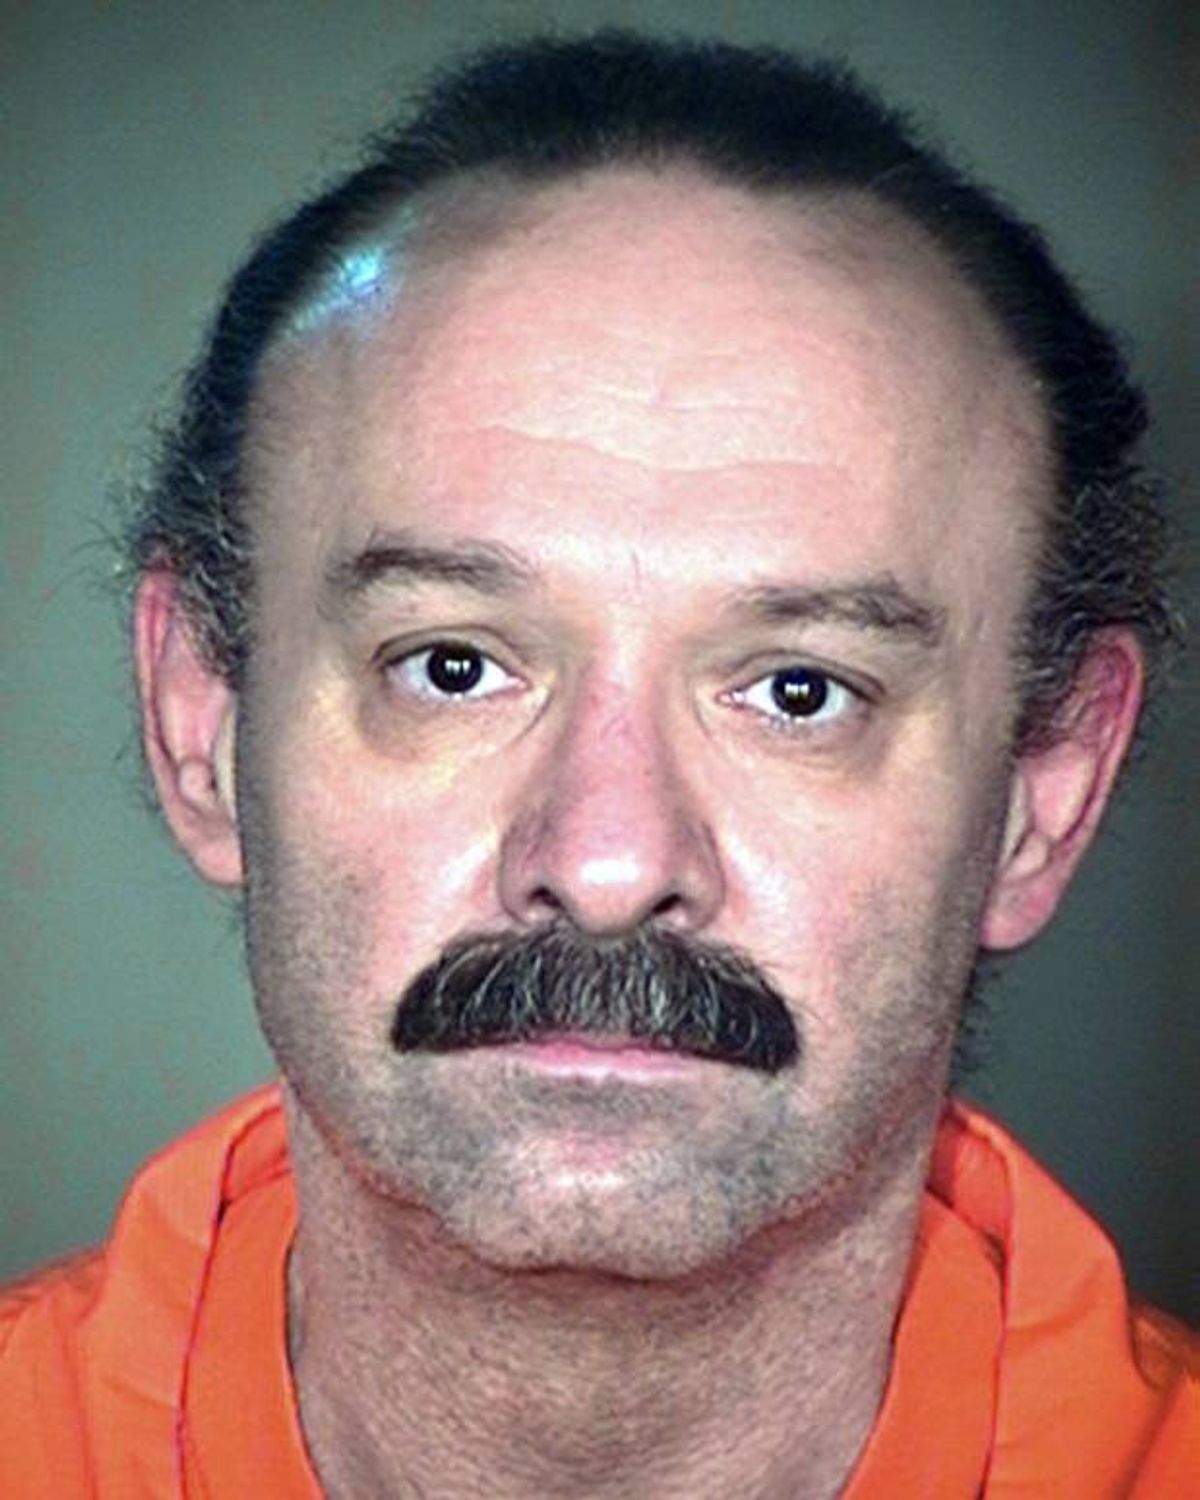 This undated file photo provided by the Arizona Department of Corrections shows inmate Joseph Rudolph Wood  (AP Photo/Arizona Department of Corrections)